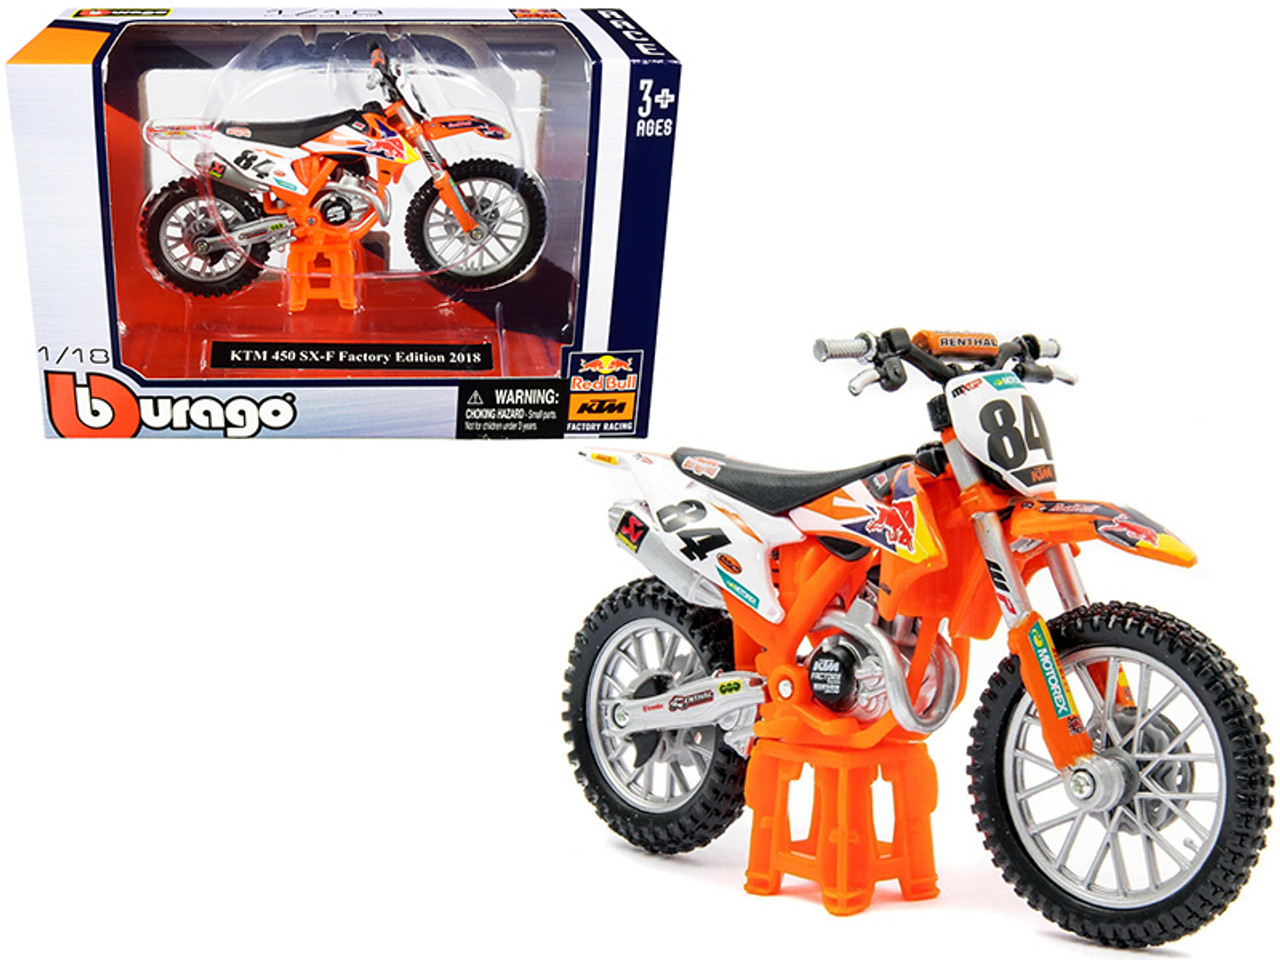 KTM 450 SX-F #84 "Red Bull" Factory Edition 2018 1/18 Diecast Motorcycle Model by Bburago